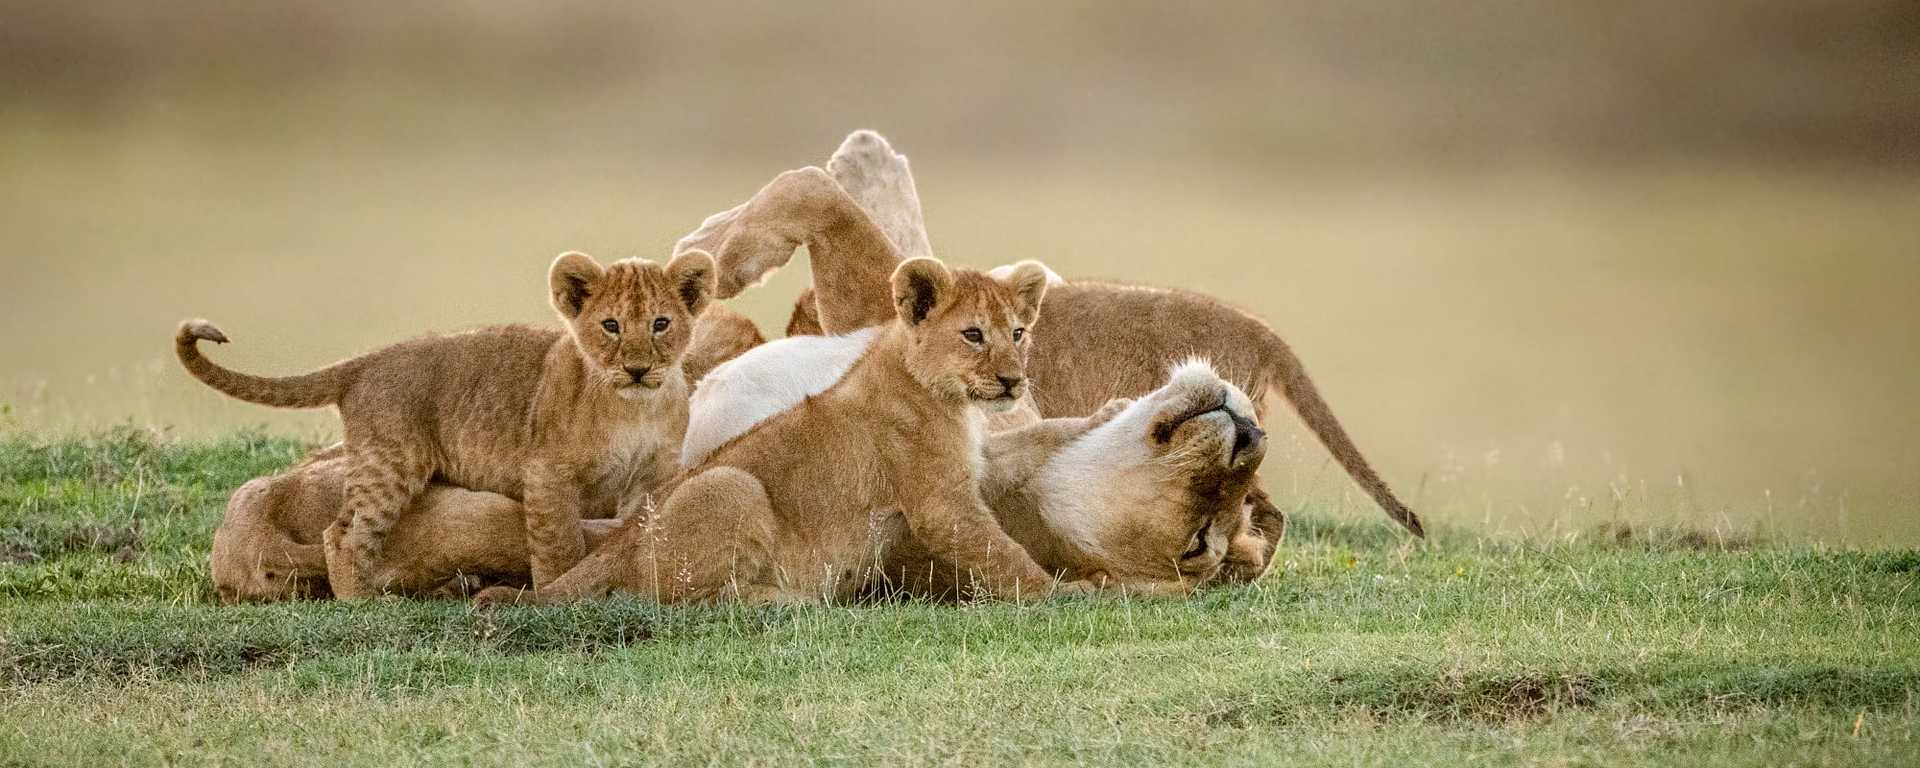 Lioness playing with her cubs at Ngorongoro Conservation Area, Tanzania